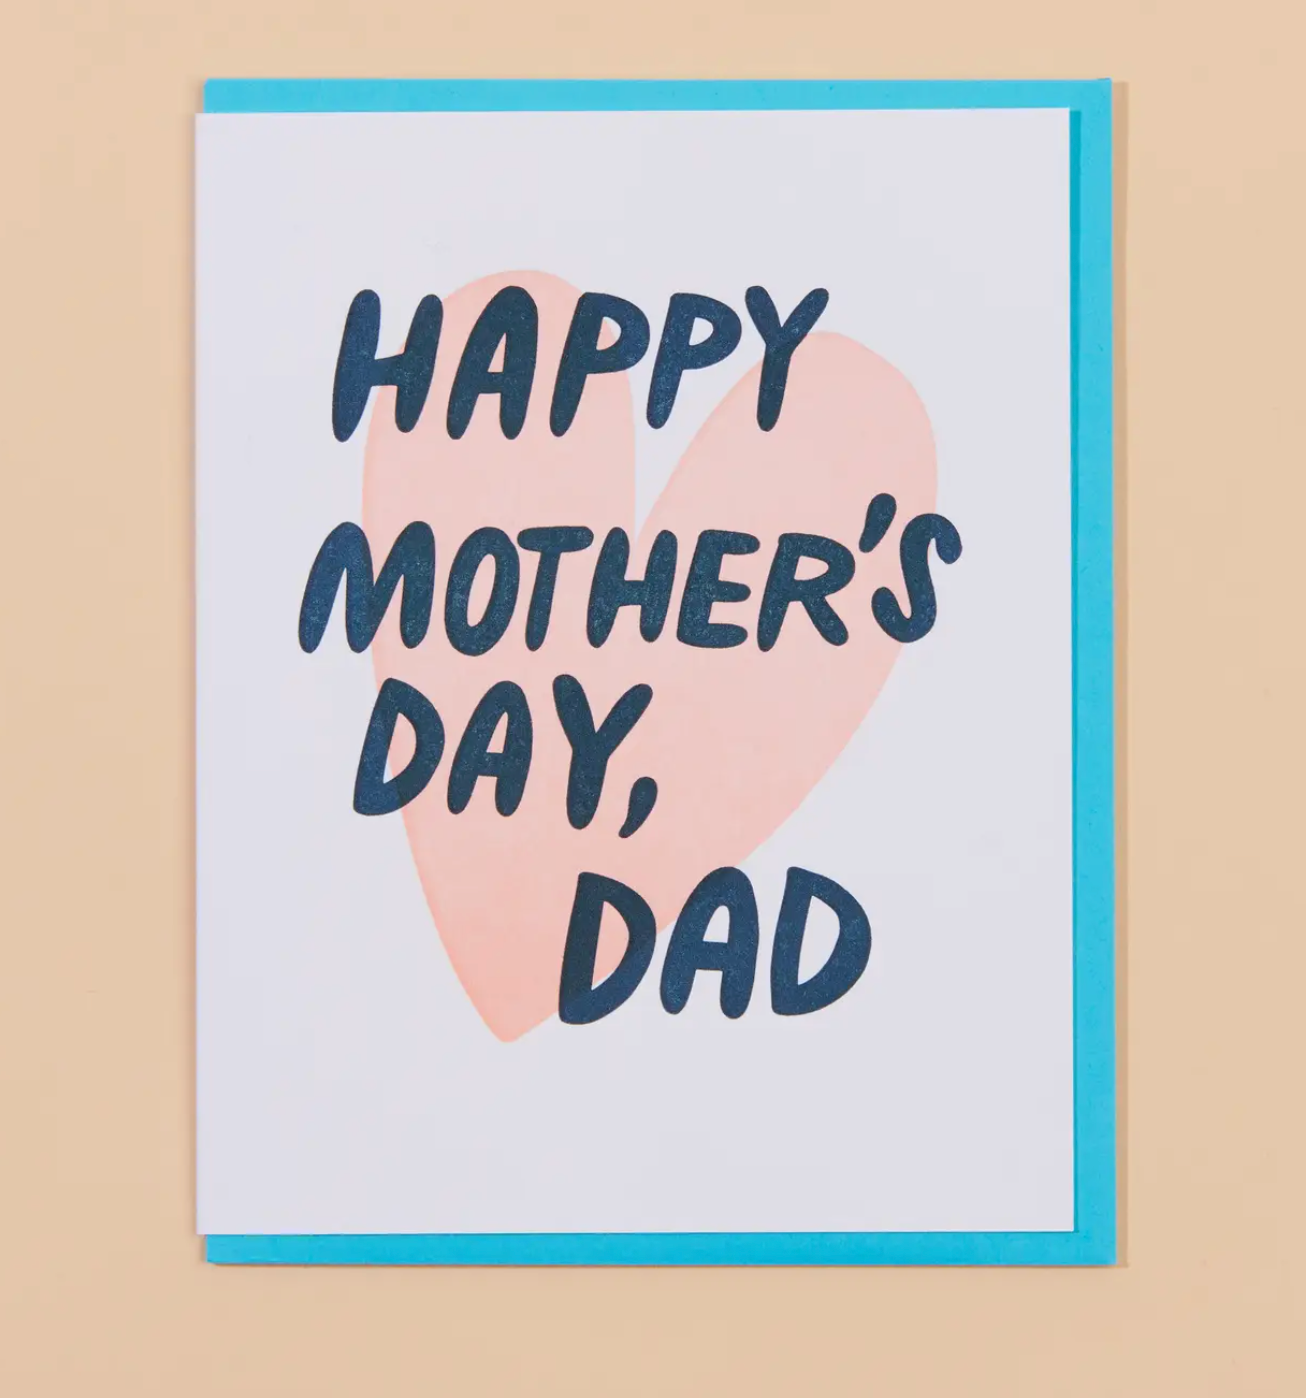 Happy Mother's Day, Dad Card